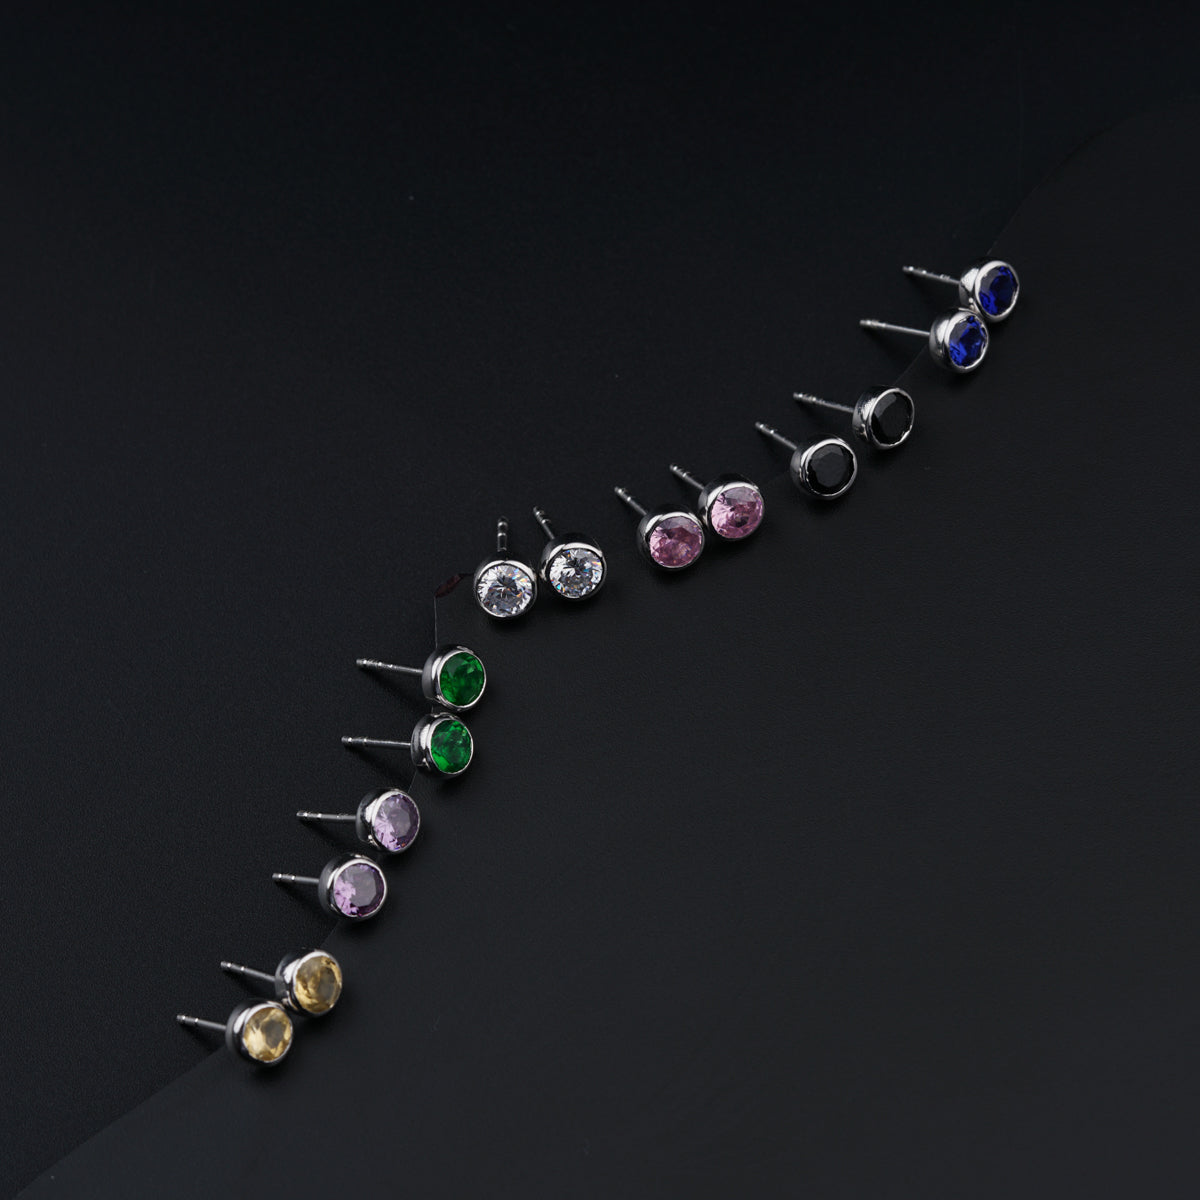 a row of different colored stones on a black surface